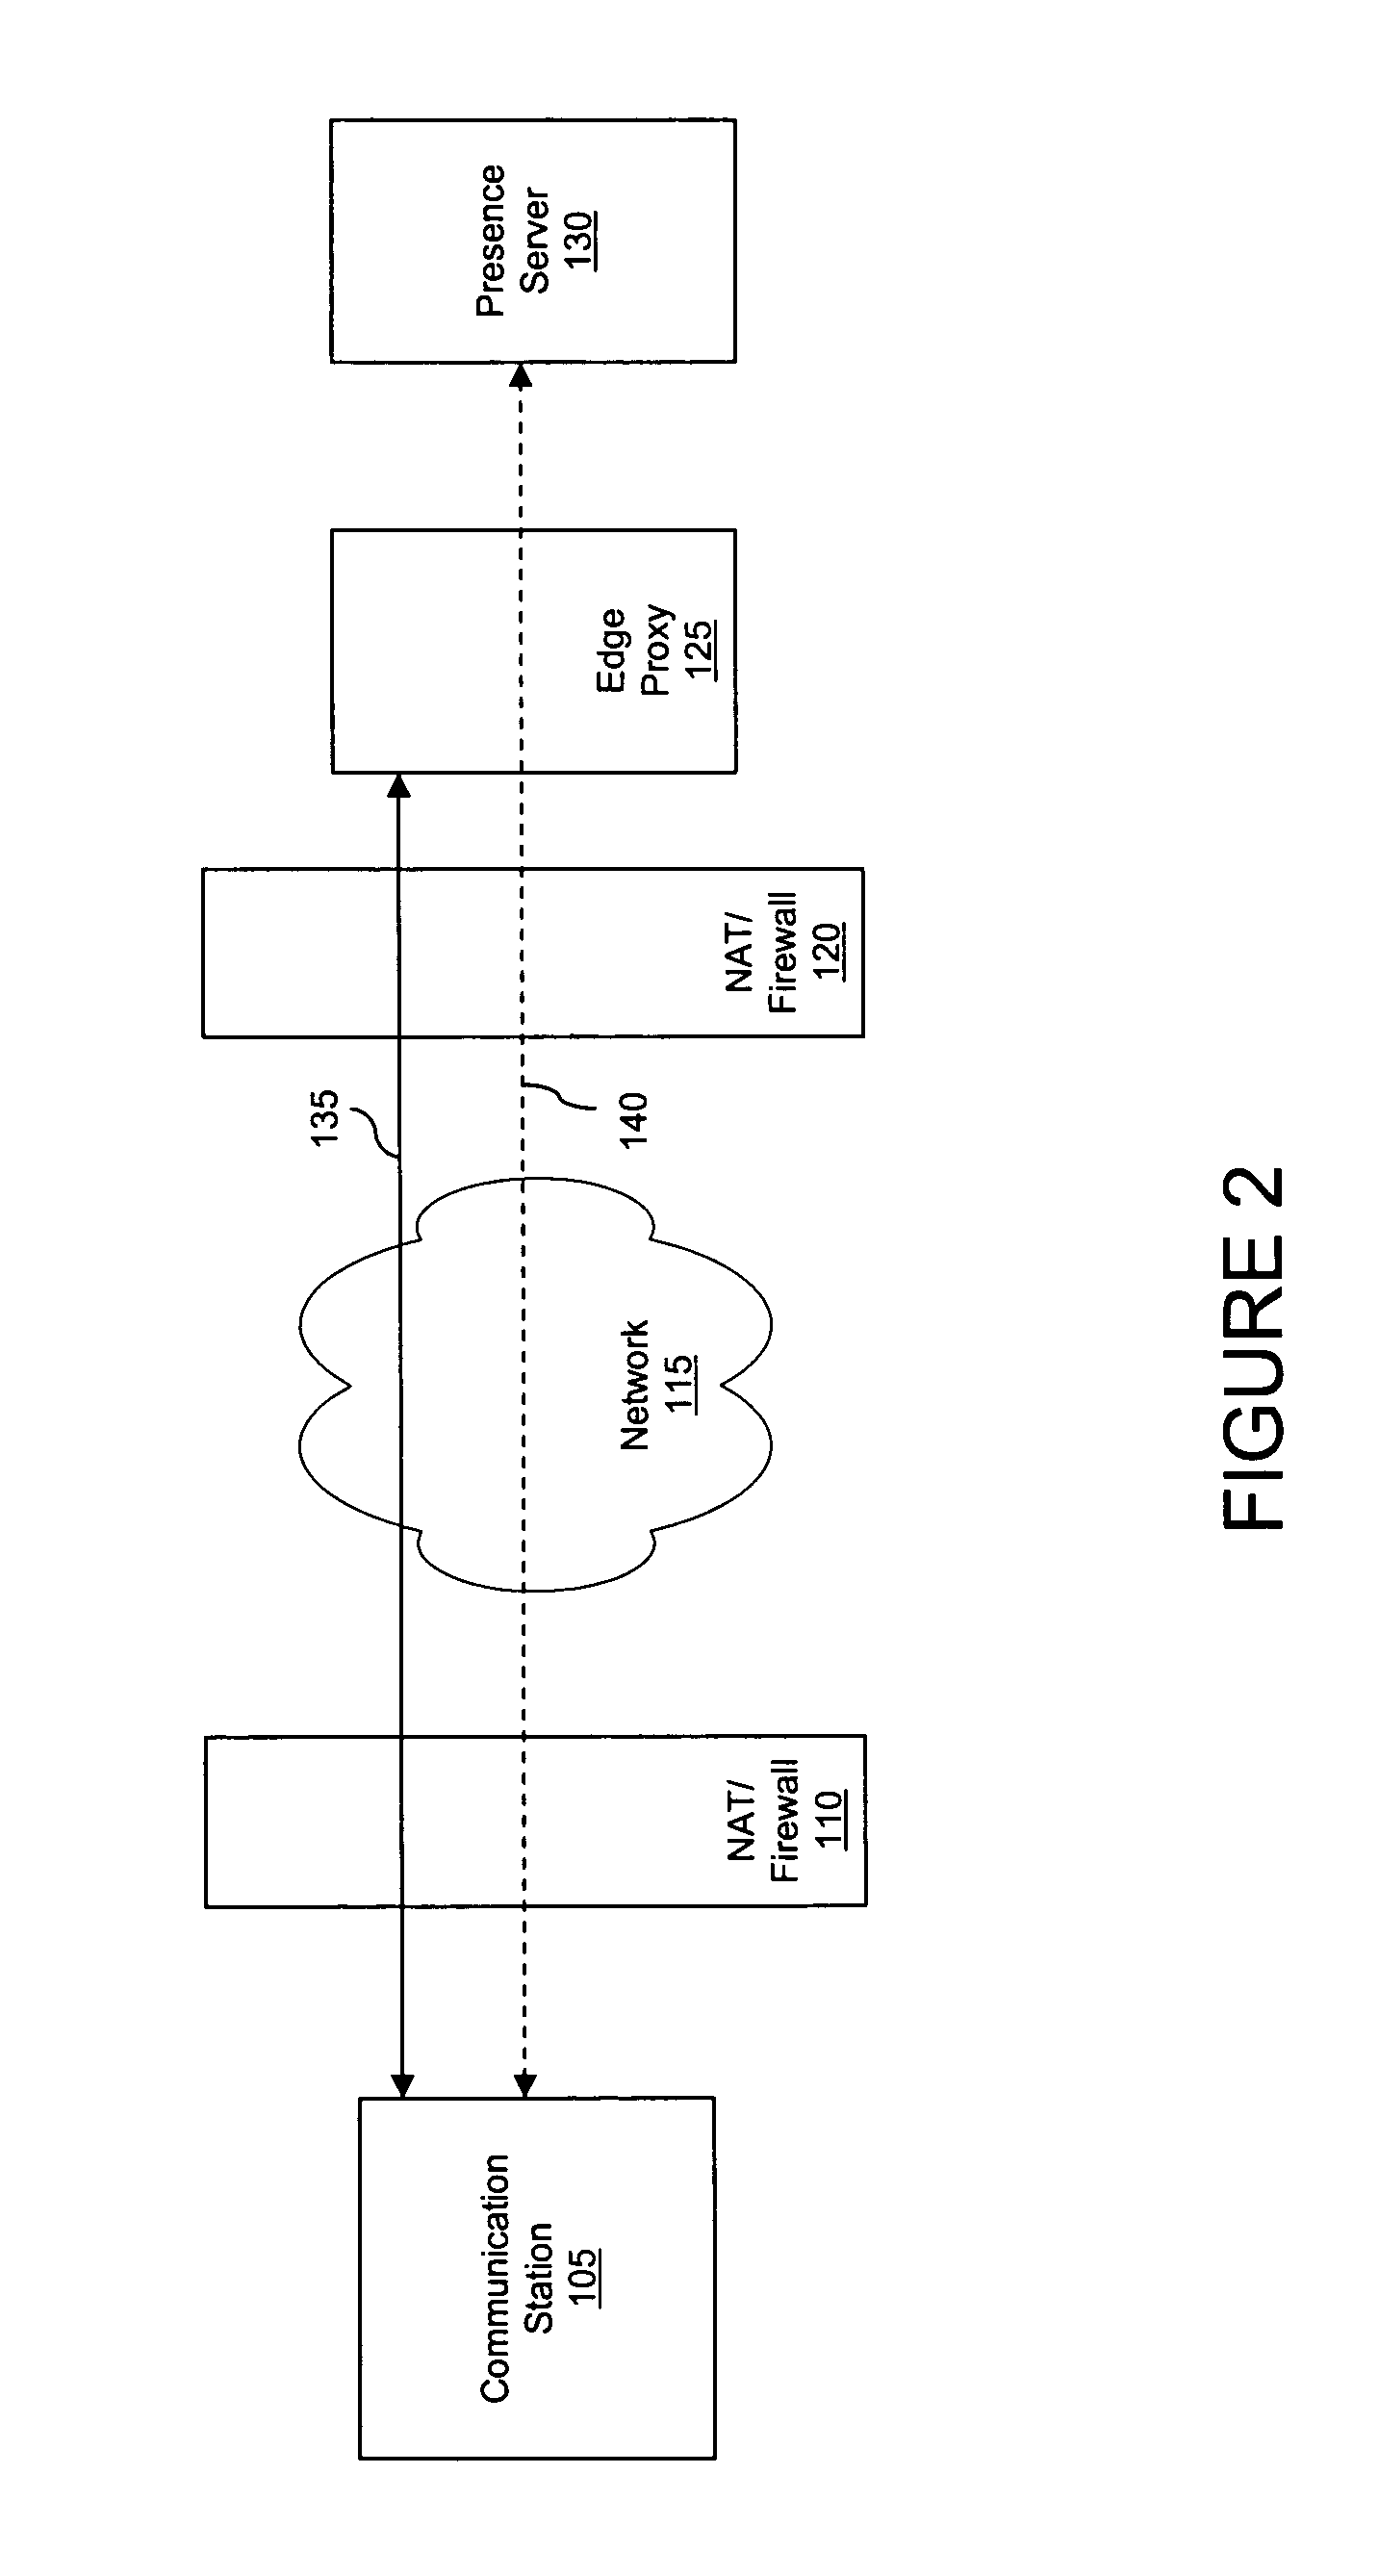 Systems and methods for providing presence information